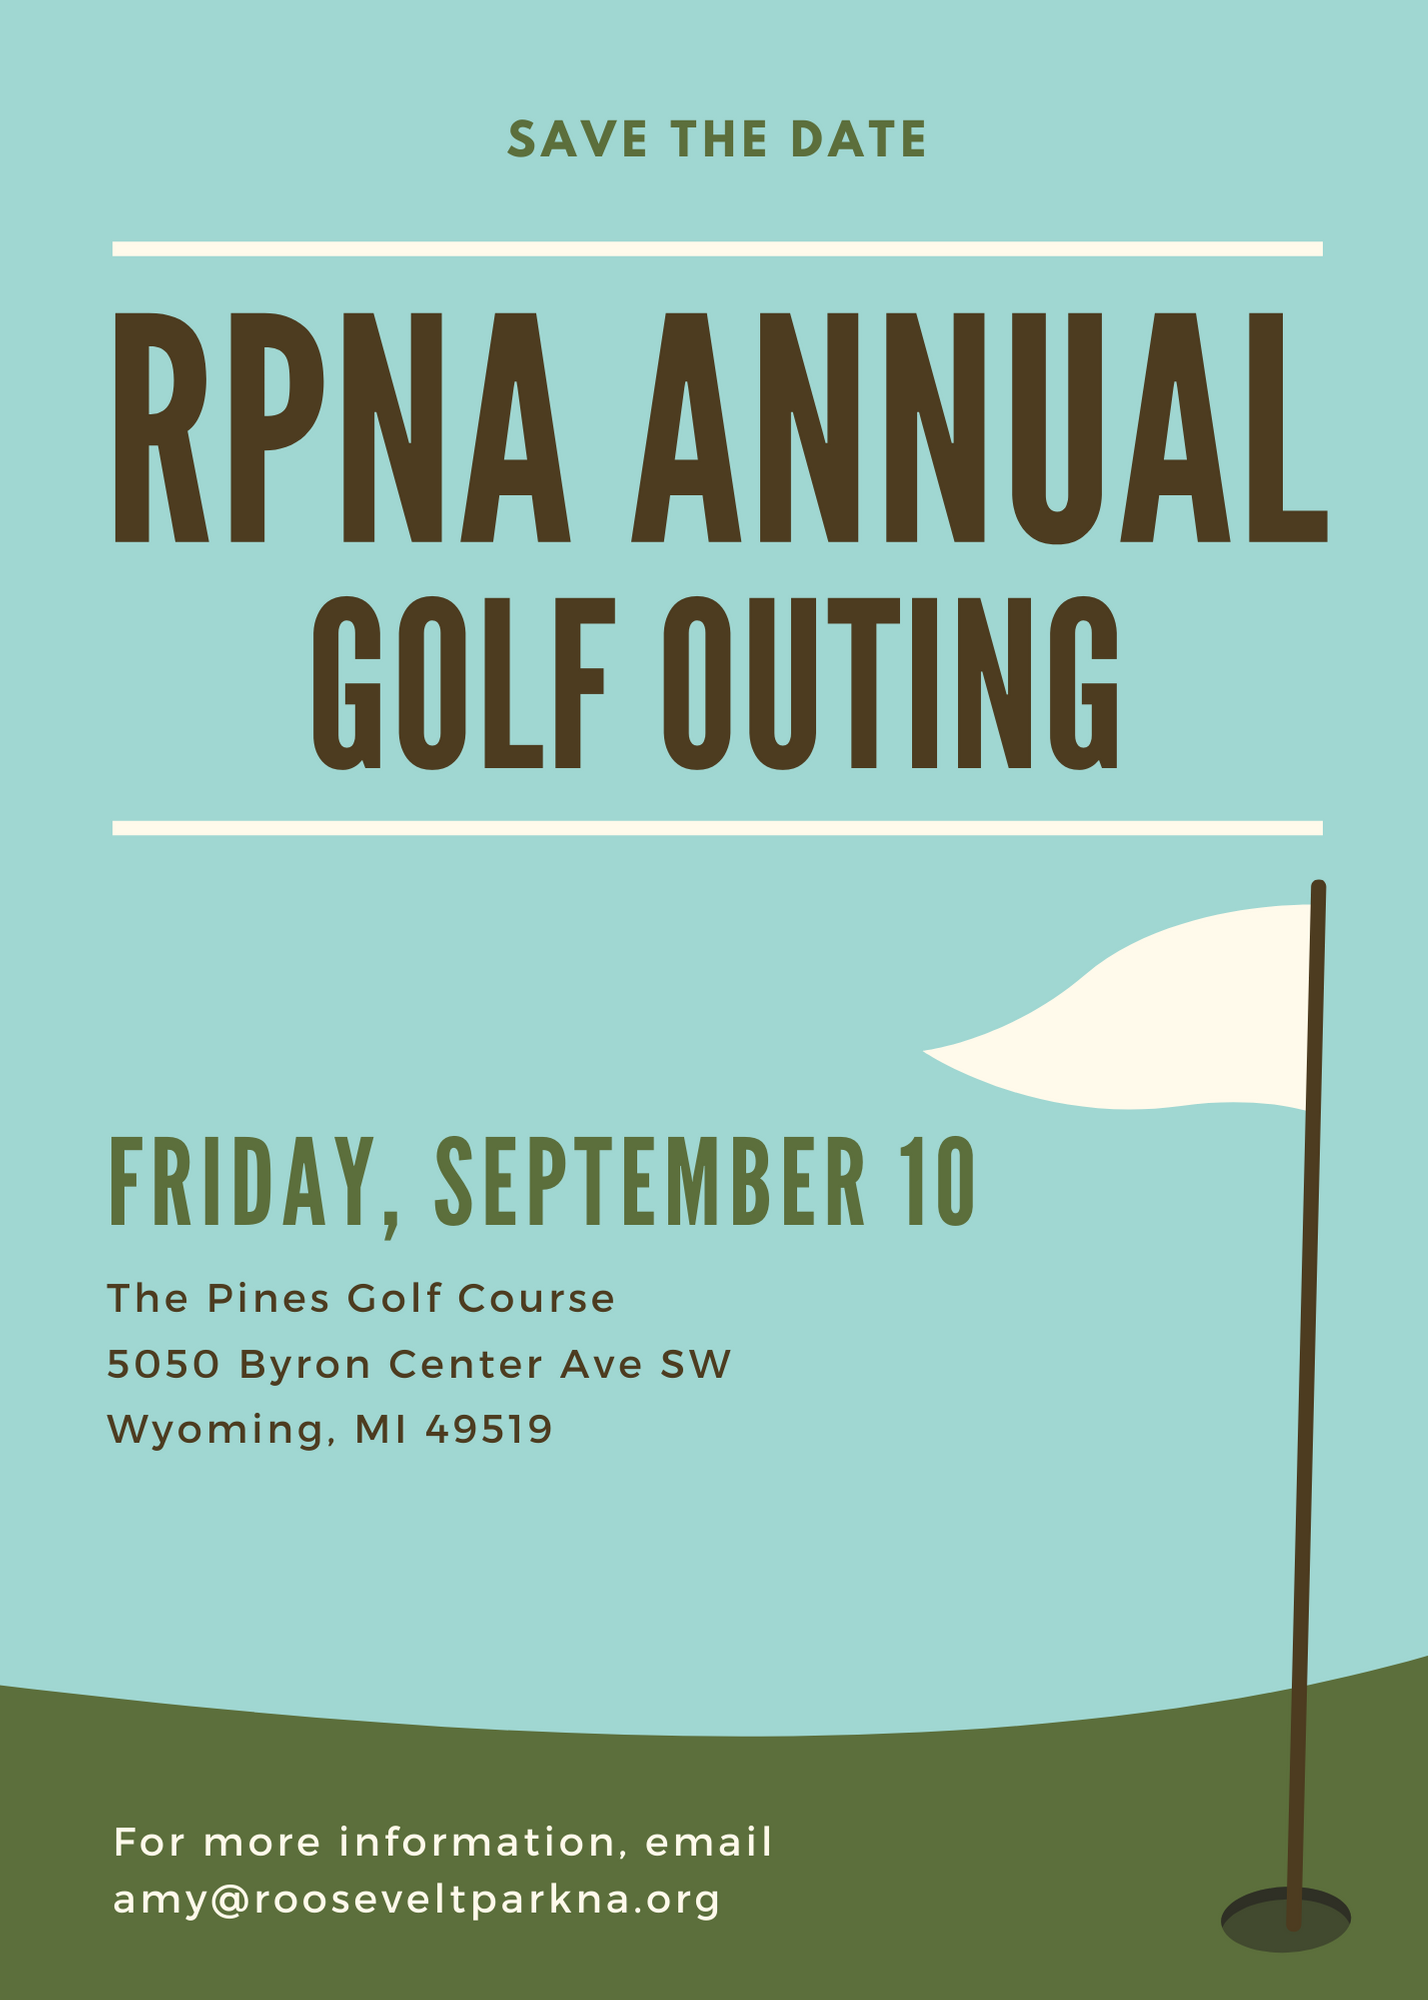 RPNA 6th Annual Golf Outing